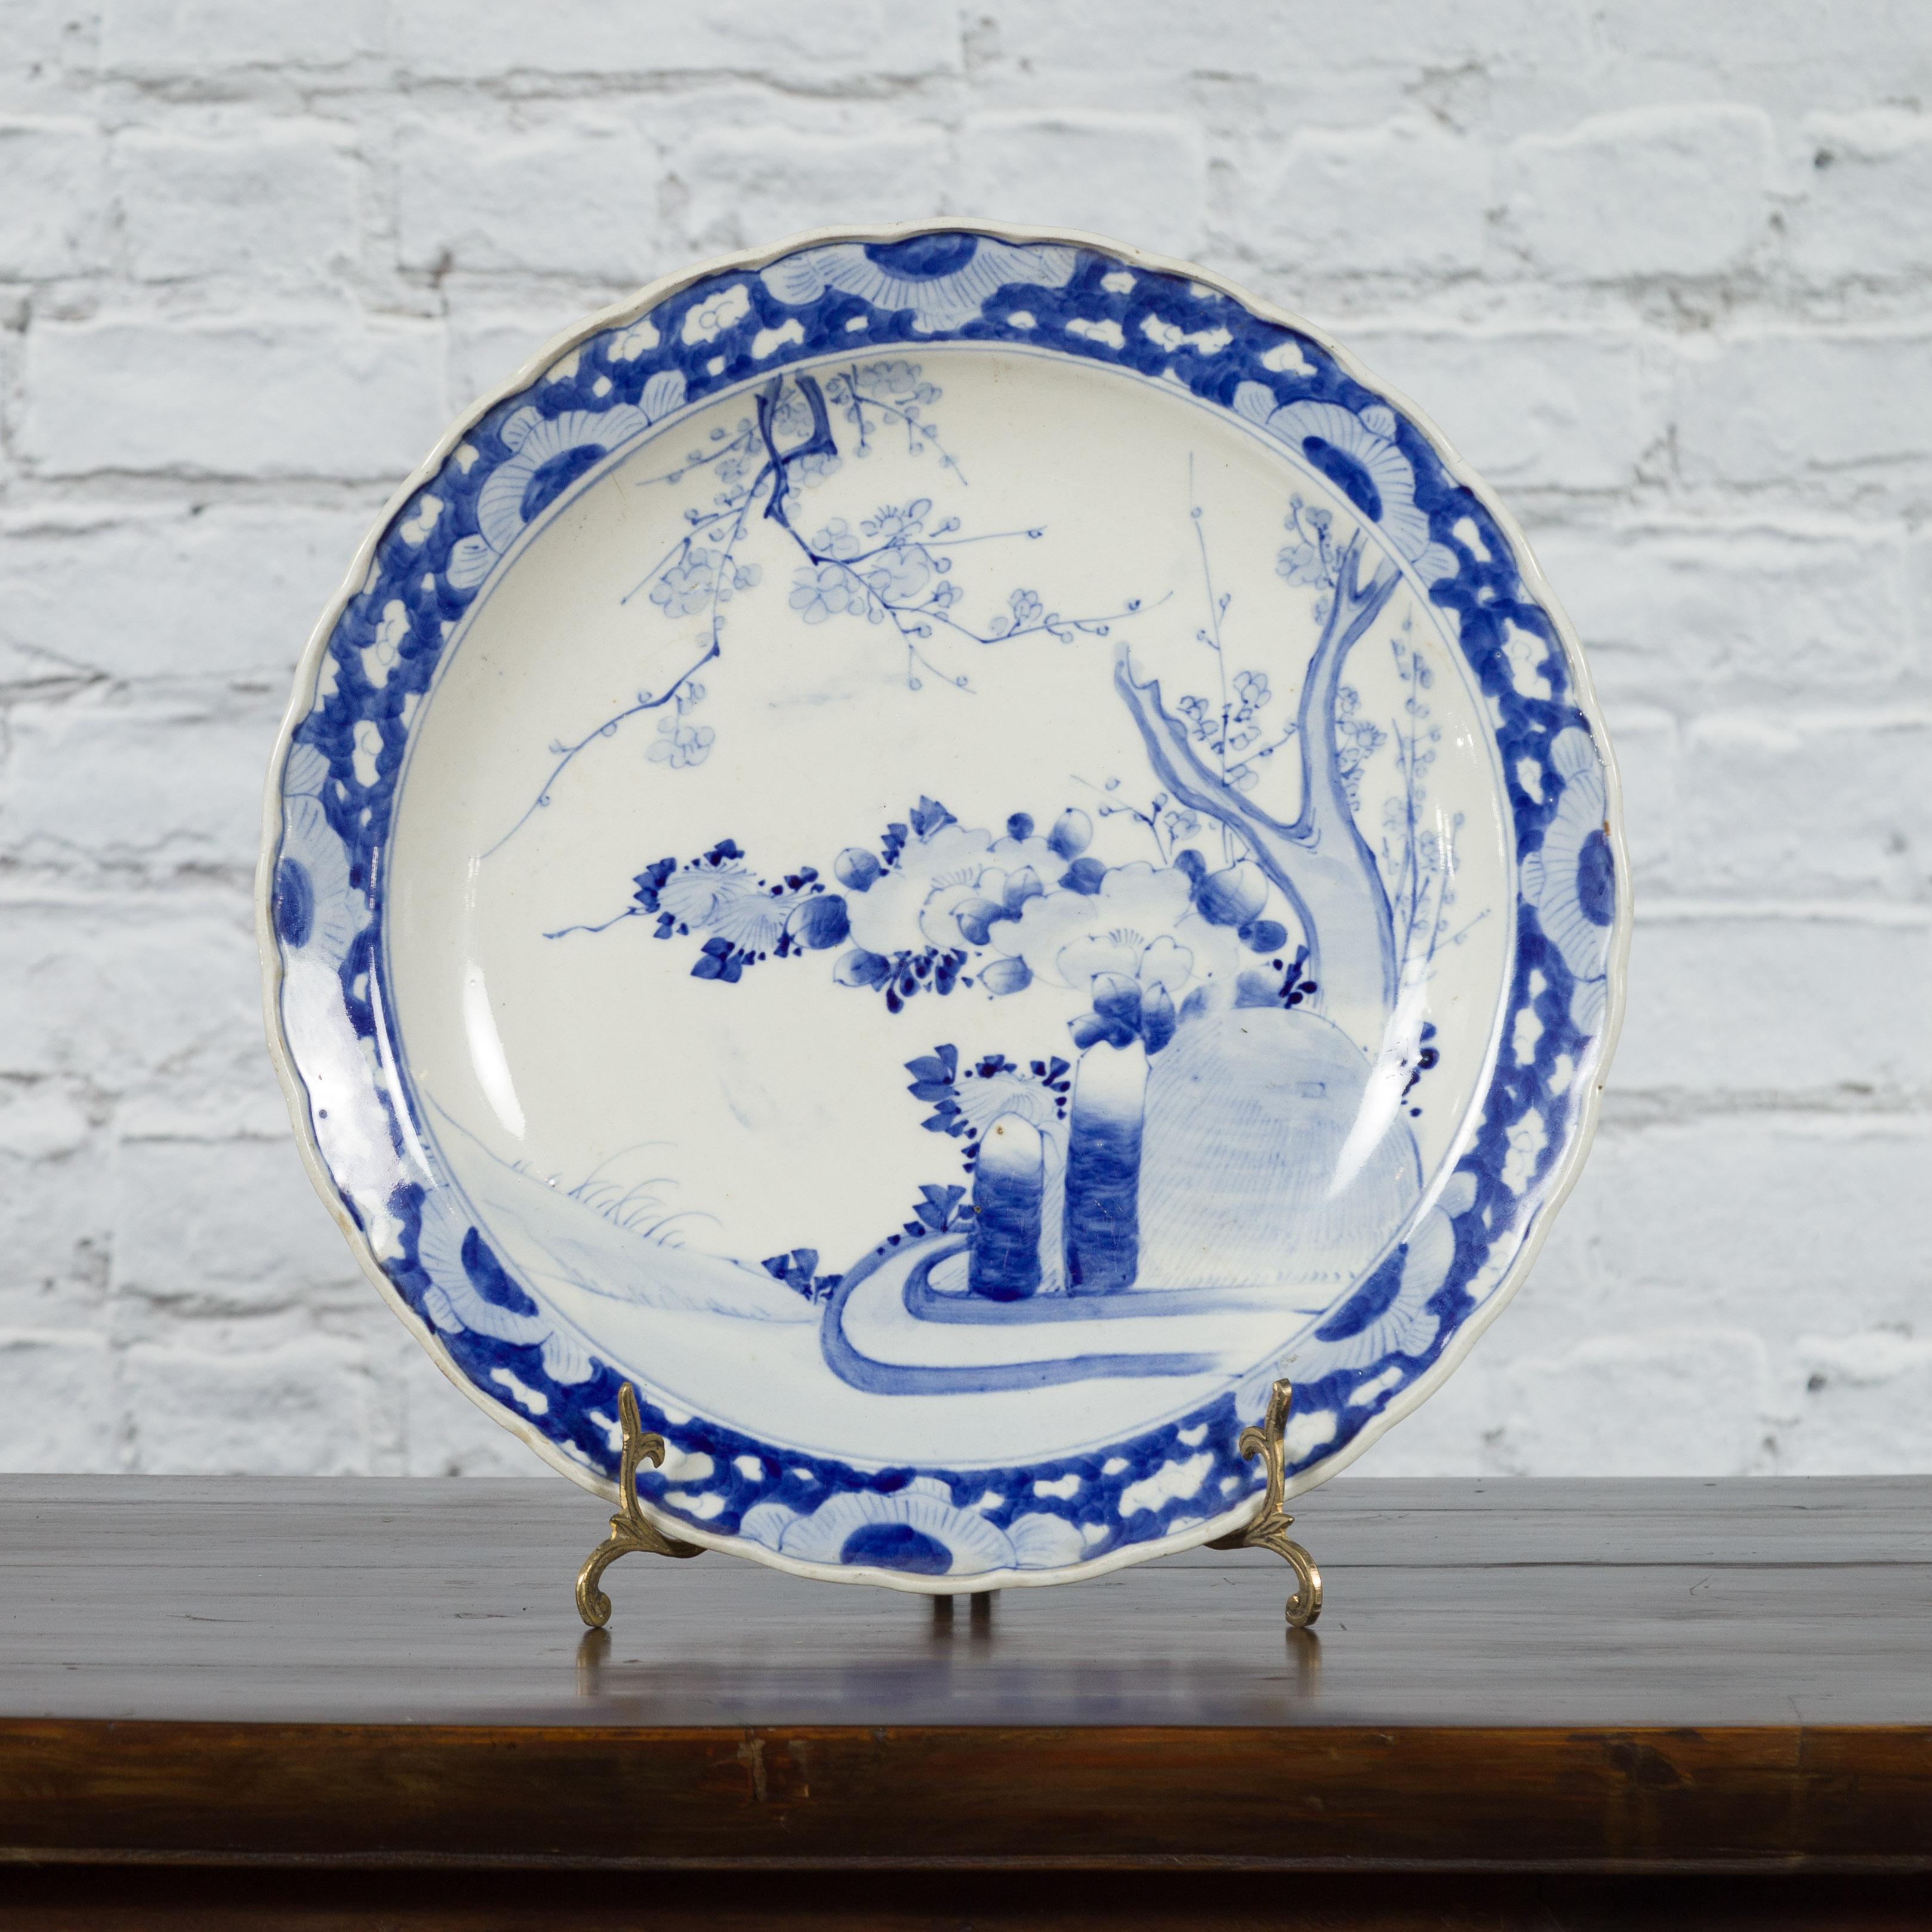 A Japanese hand-painted porcelain plate from the 19th century, with blue and white tree and foliage décor and scalloped edge. Created in Japan during the 19th century, this porcelain plate features a delicate blue and white décor depicting a